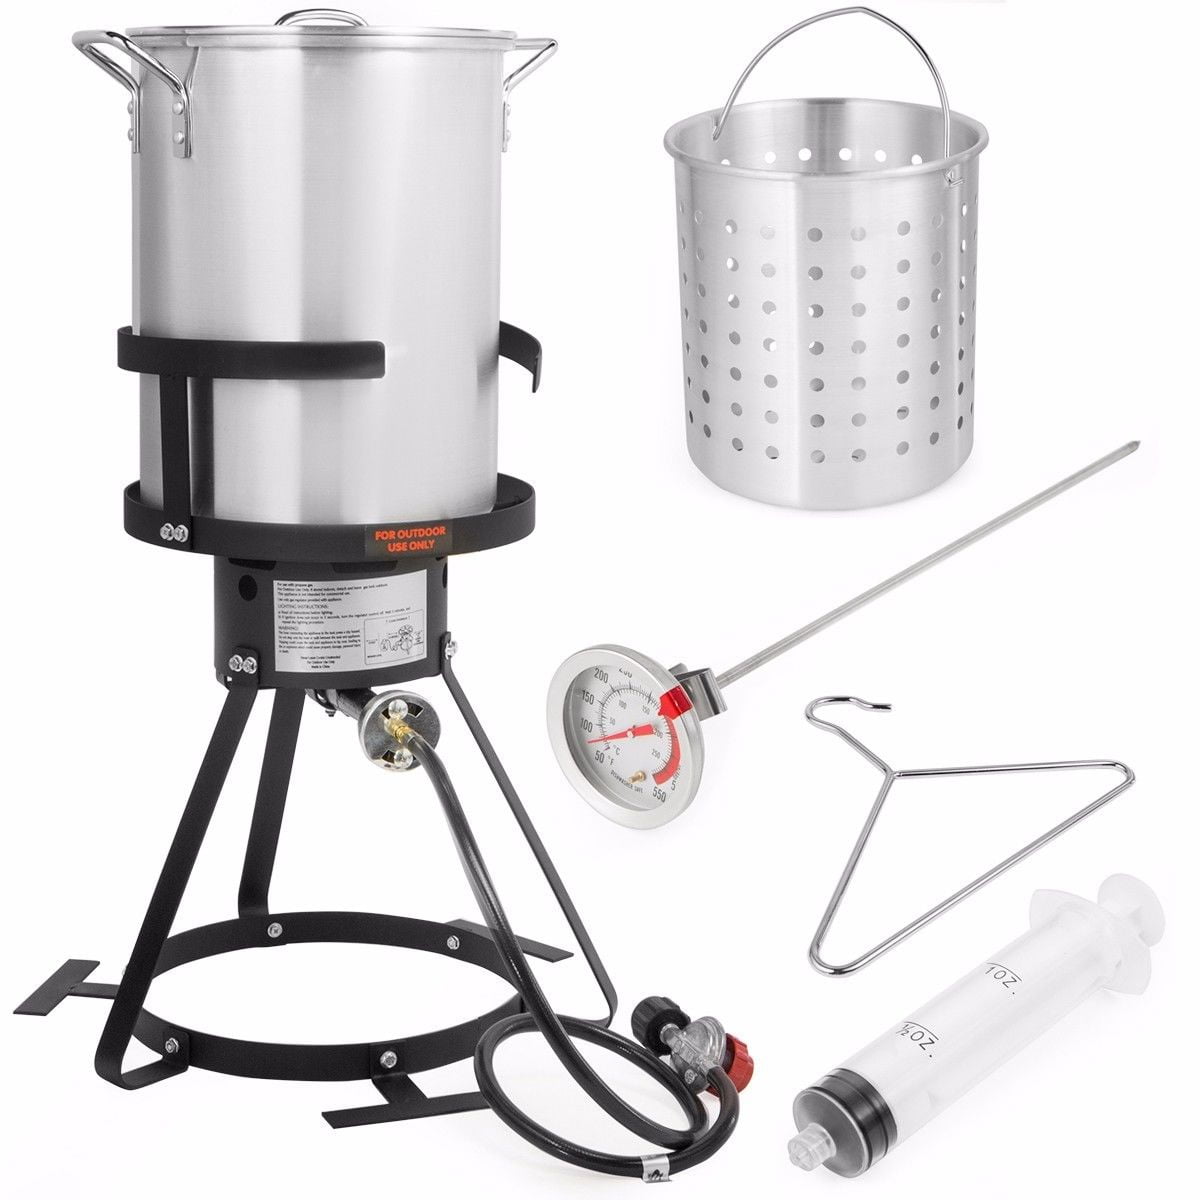 Deep Fryer Pot with Thermometer - Uptimac